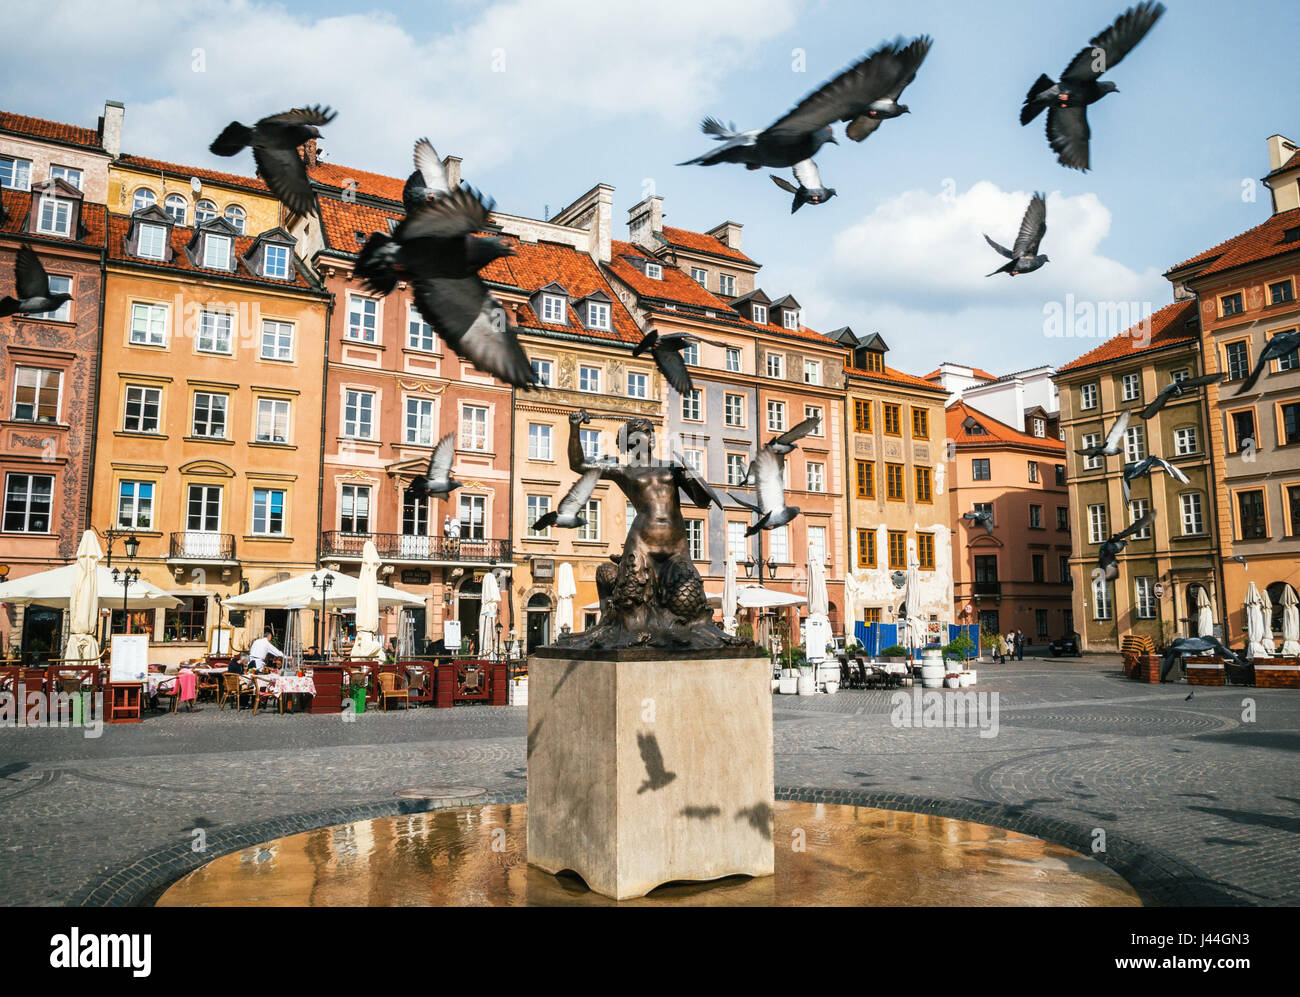 Birds of pigeons are flying through Stare Miasto Old Town Market Square with Mermaid Syrena Statue in the center of Warsaw, Poland. Stock Photo